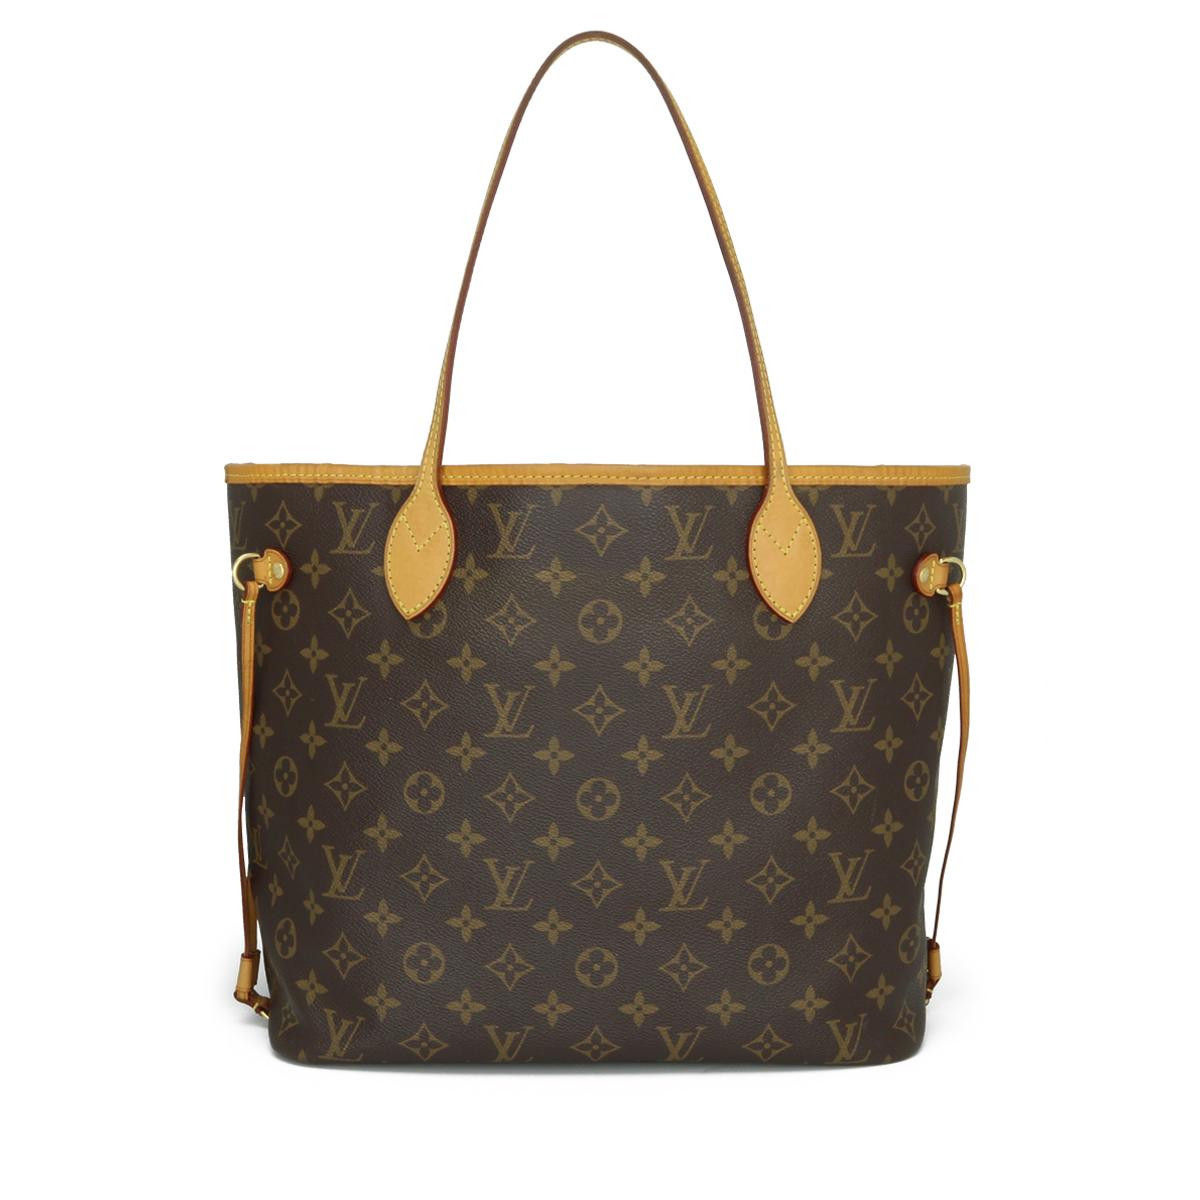 Louis Vuitton Neverfull MM in Monogram with Pivoine Interior 2016.

This bag is in very good condition. 

- Exterior Condition: Very good condition. Very light surface rubbing to four base corners. Light general marking and leather wear around the